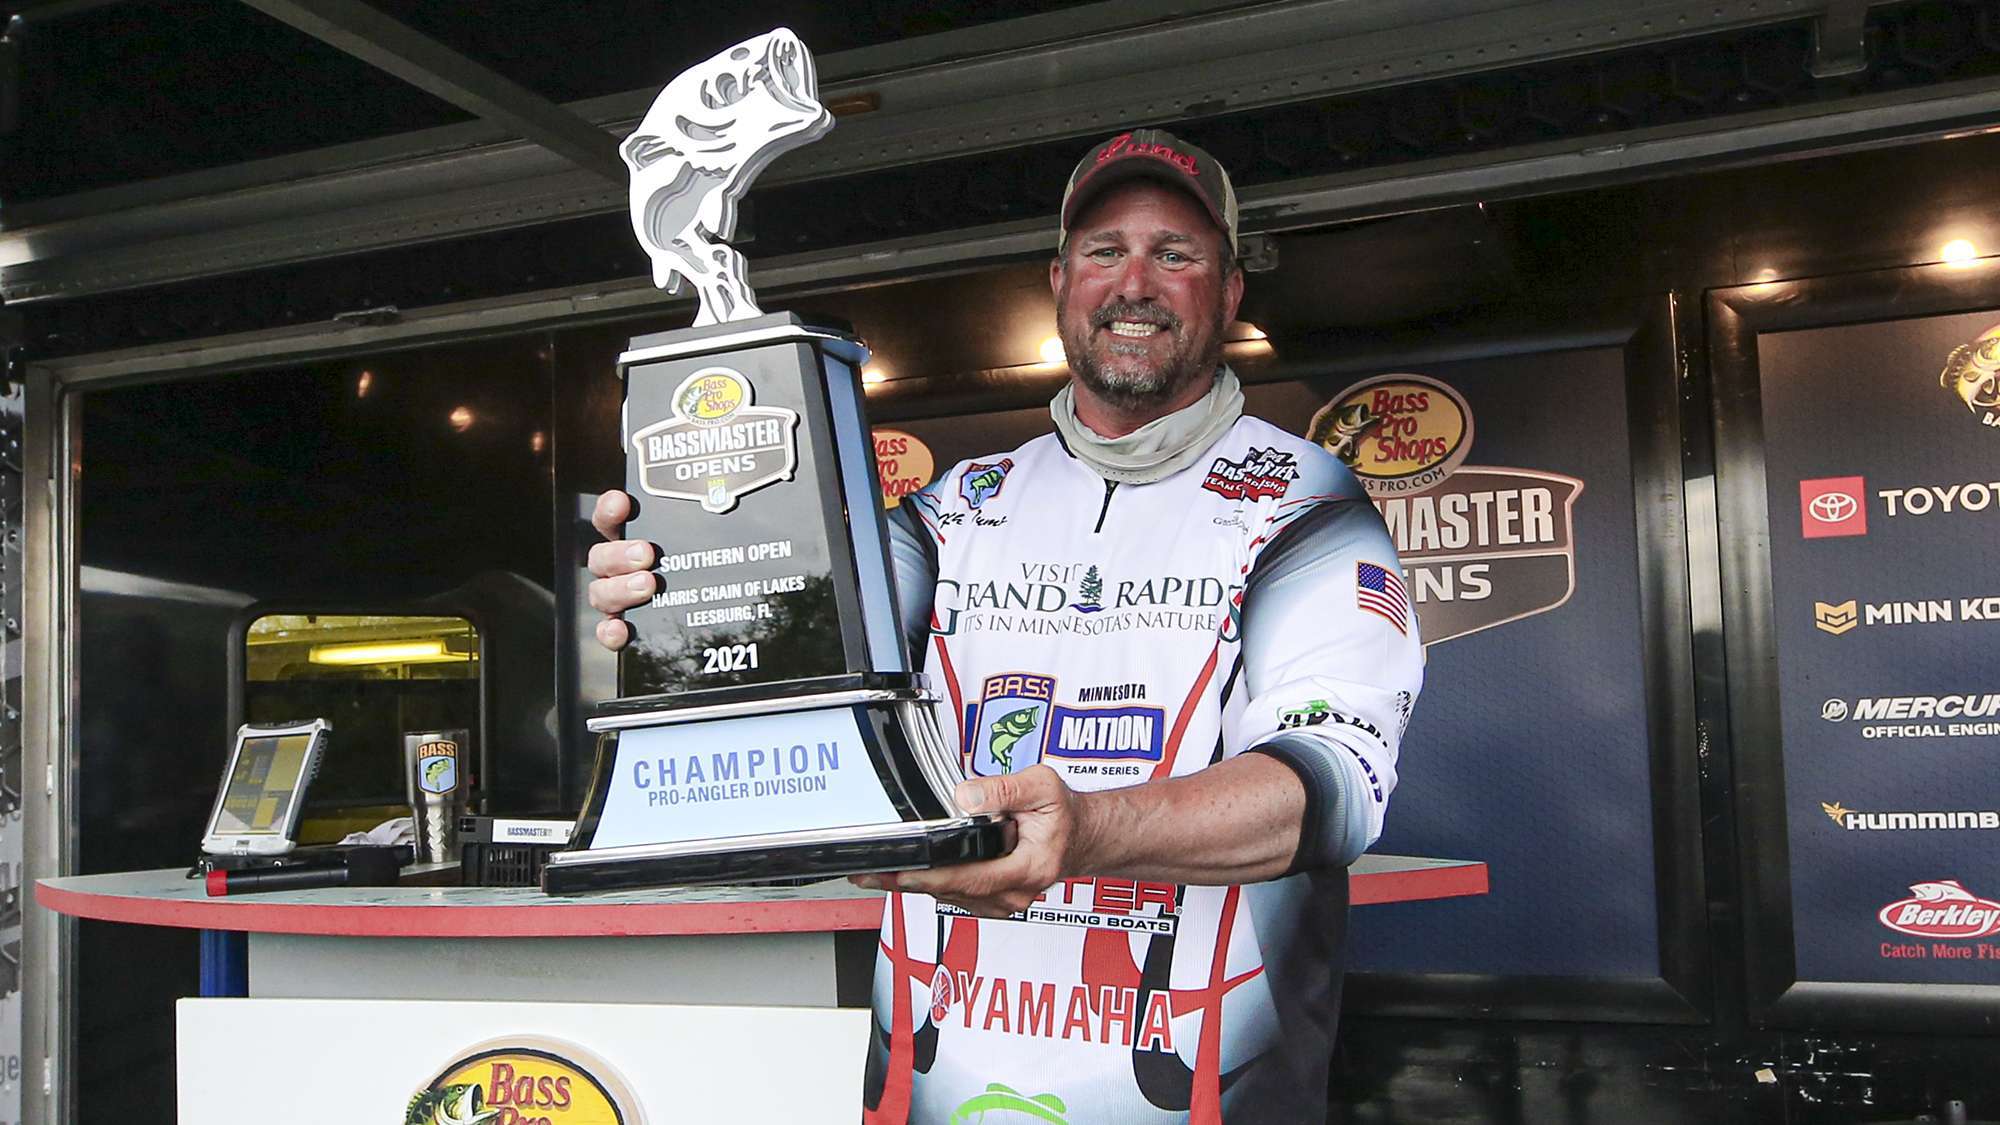 The Elite Series has not competed here since 2011 (with Shaw Grigsby winning that event). Last year the Bassmaster Opens fished on the Harris Chain and Keith Tuma took home the trophy with a total of 58-13.